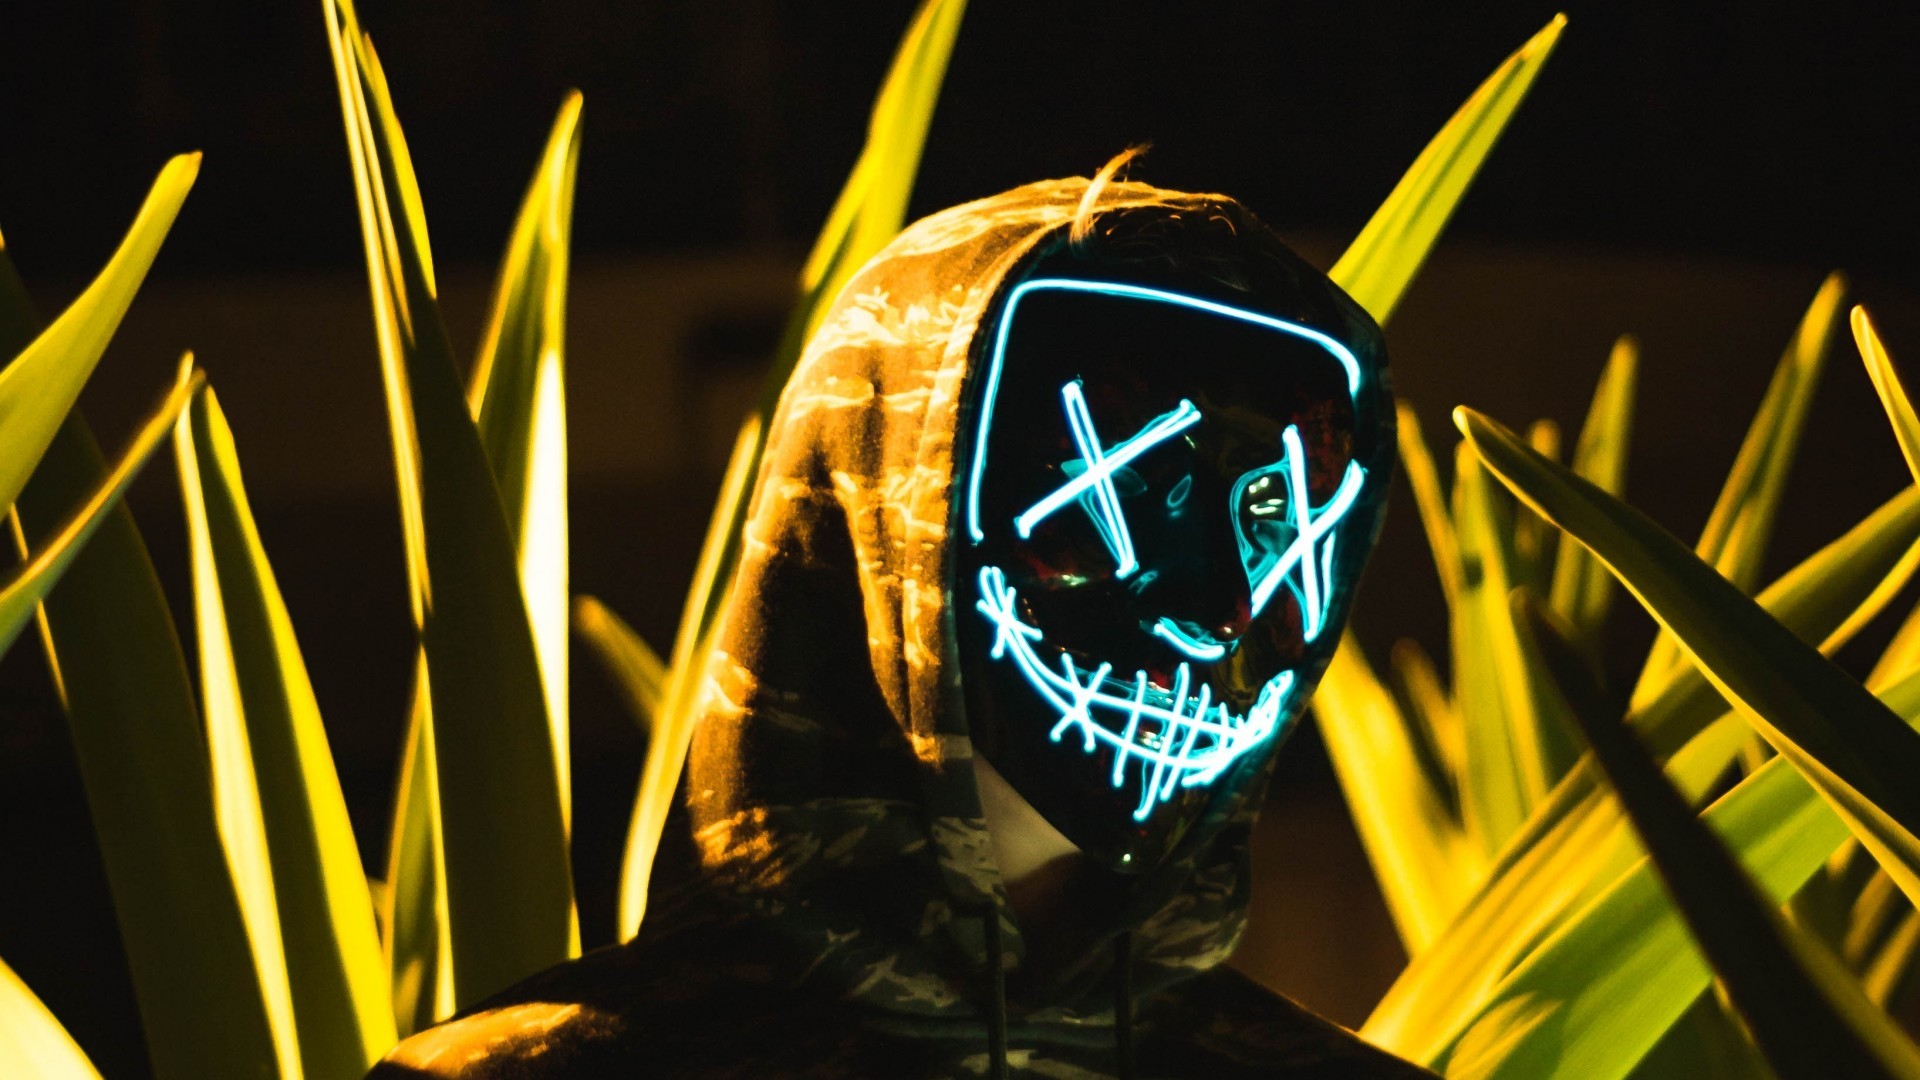 Xx Mask, Anonymous, Hoodie, Reckless - Led Mask - HD Wallpaper 